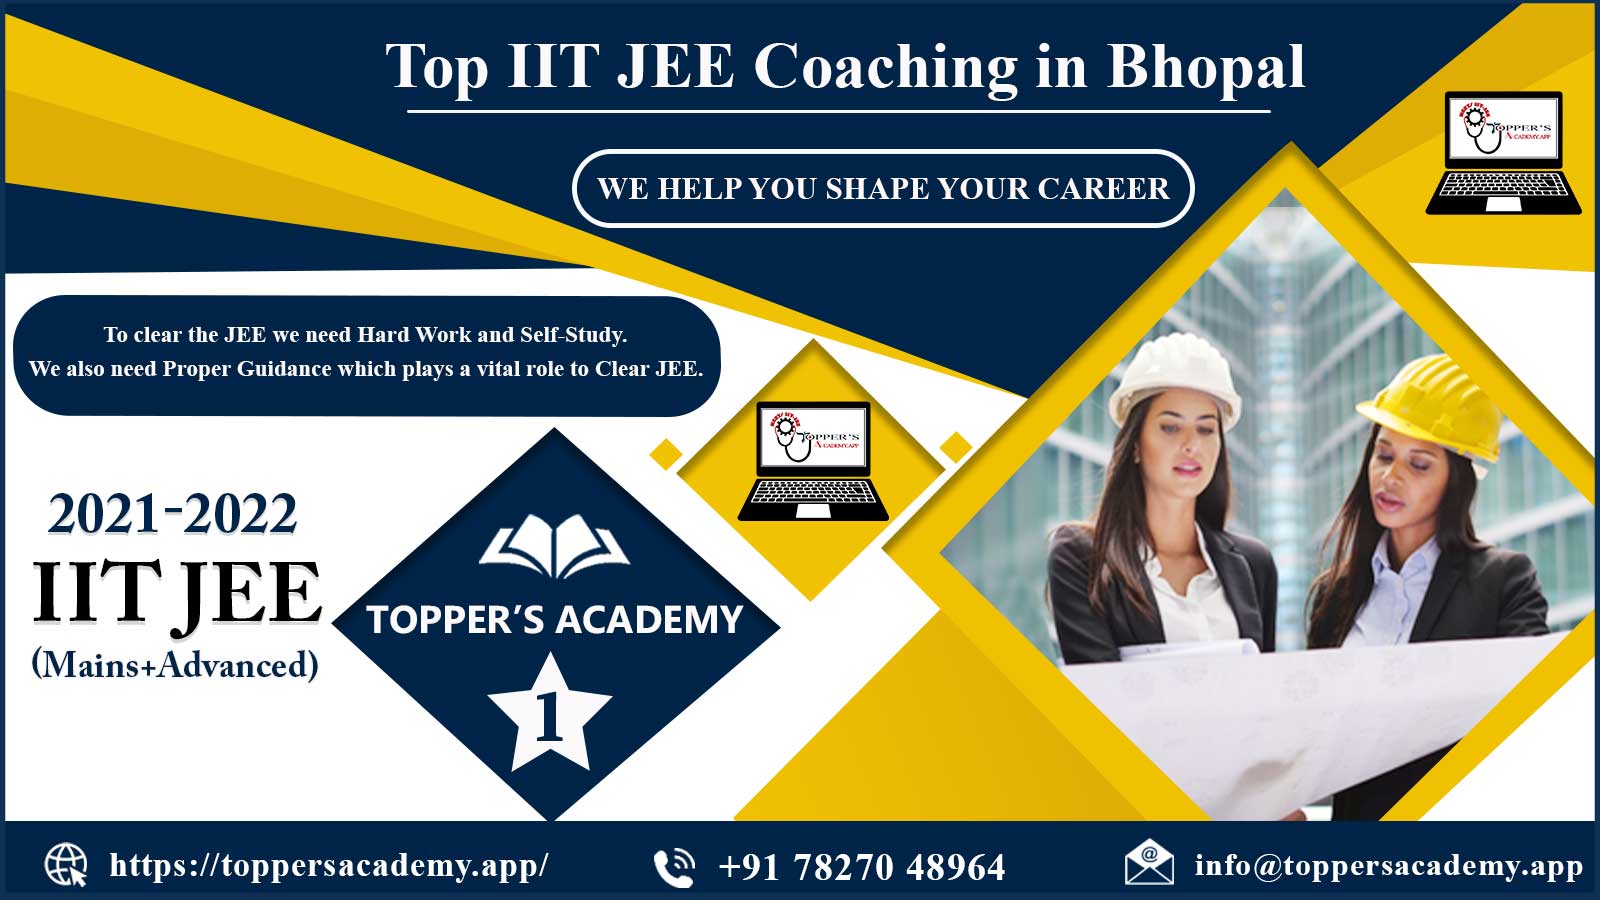 Toppers Academy IIT JEE Coaching in Bhopal